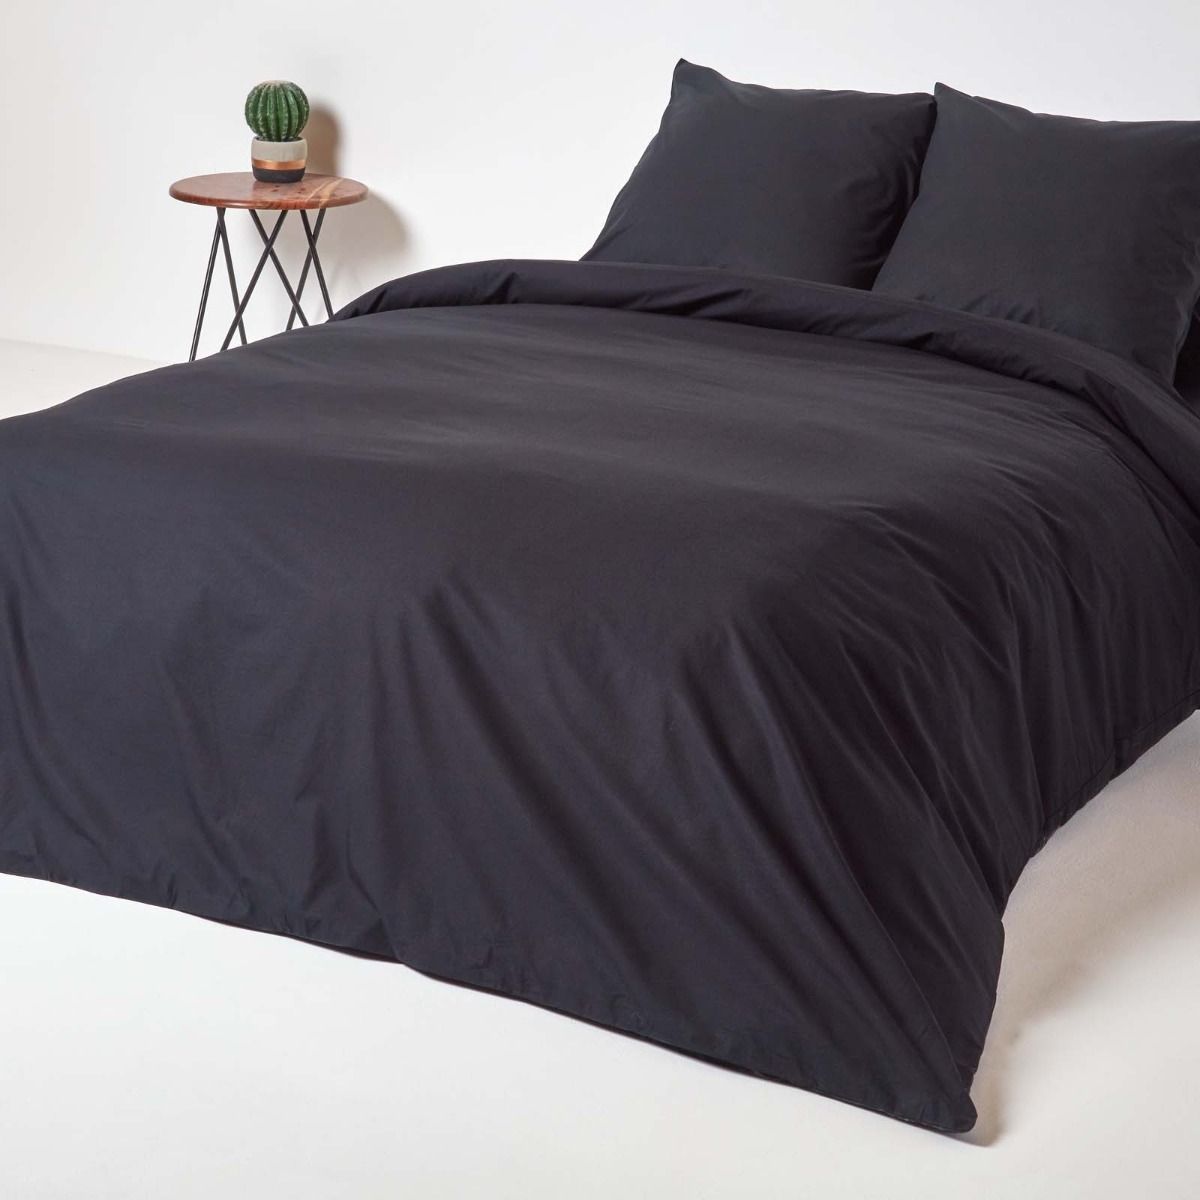 HOMESCAPES Black Pure Egyptian Cotton Duvet Cover Set King Size 200 TC 400 Thread Count Equivalent 2 Pillowcases Included Quilt Cover Bedding Set